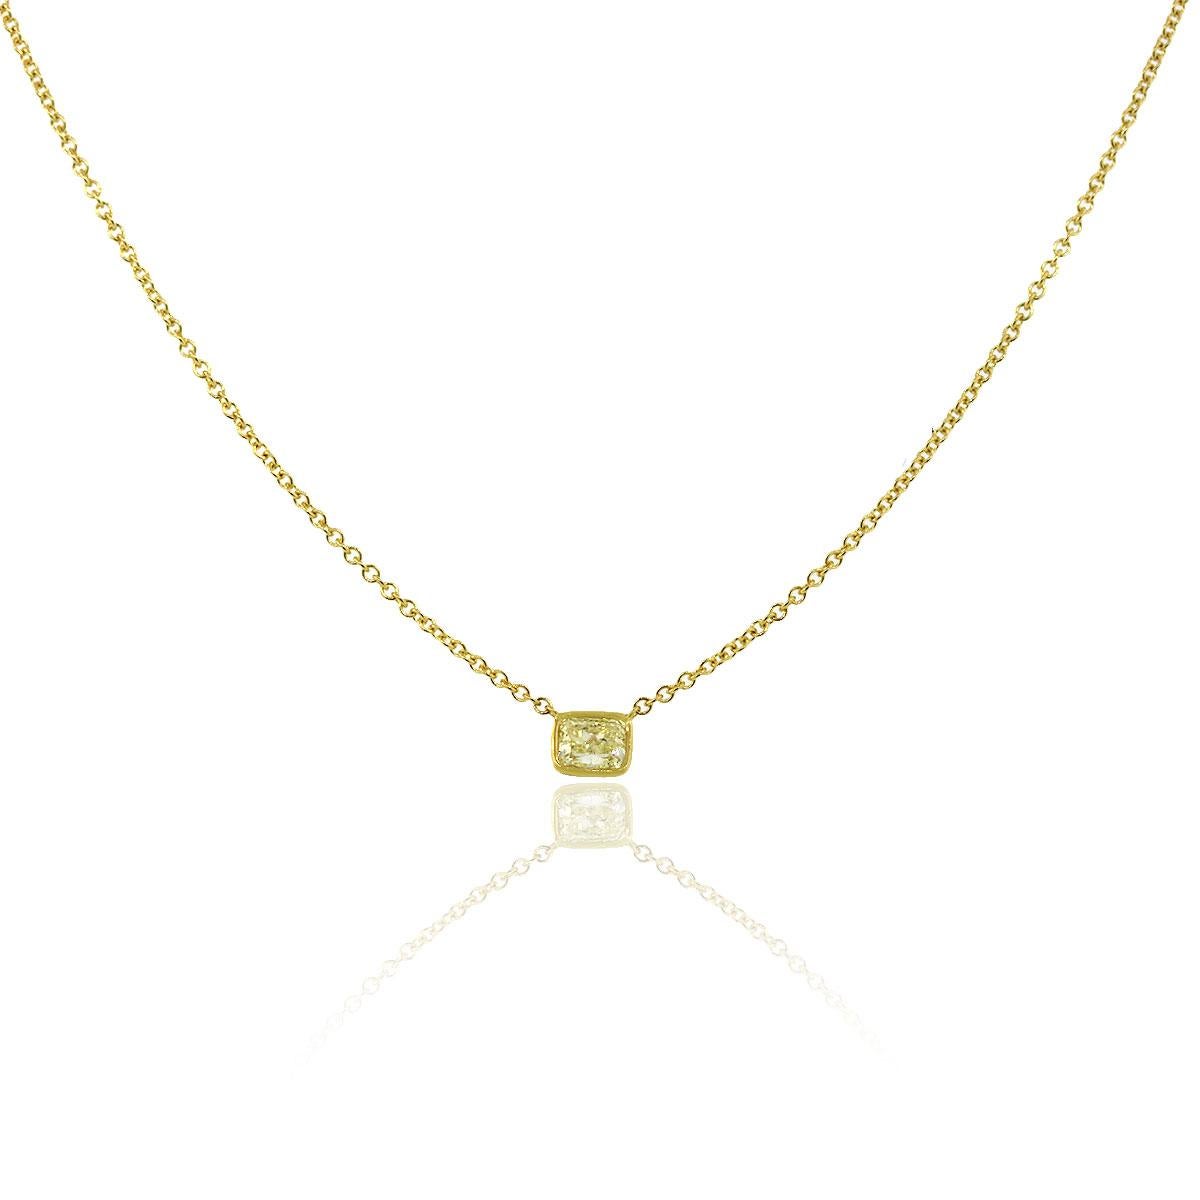 Material: 18k Yellow gold
Diamond Details: Approximately 0.71ctw Fancy Yellow Radiant Cut Diamond, VS in clarity
Measurements: 18″ in length with 16